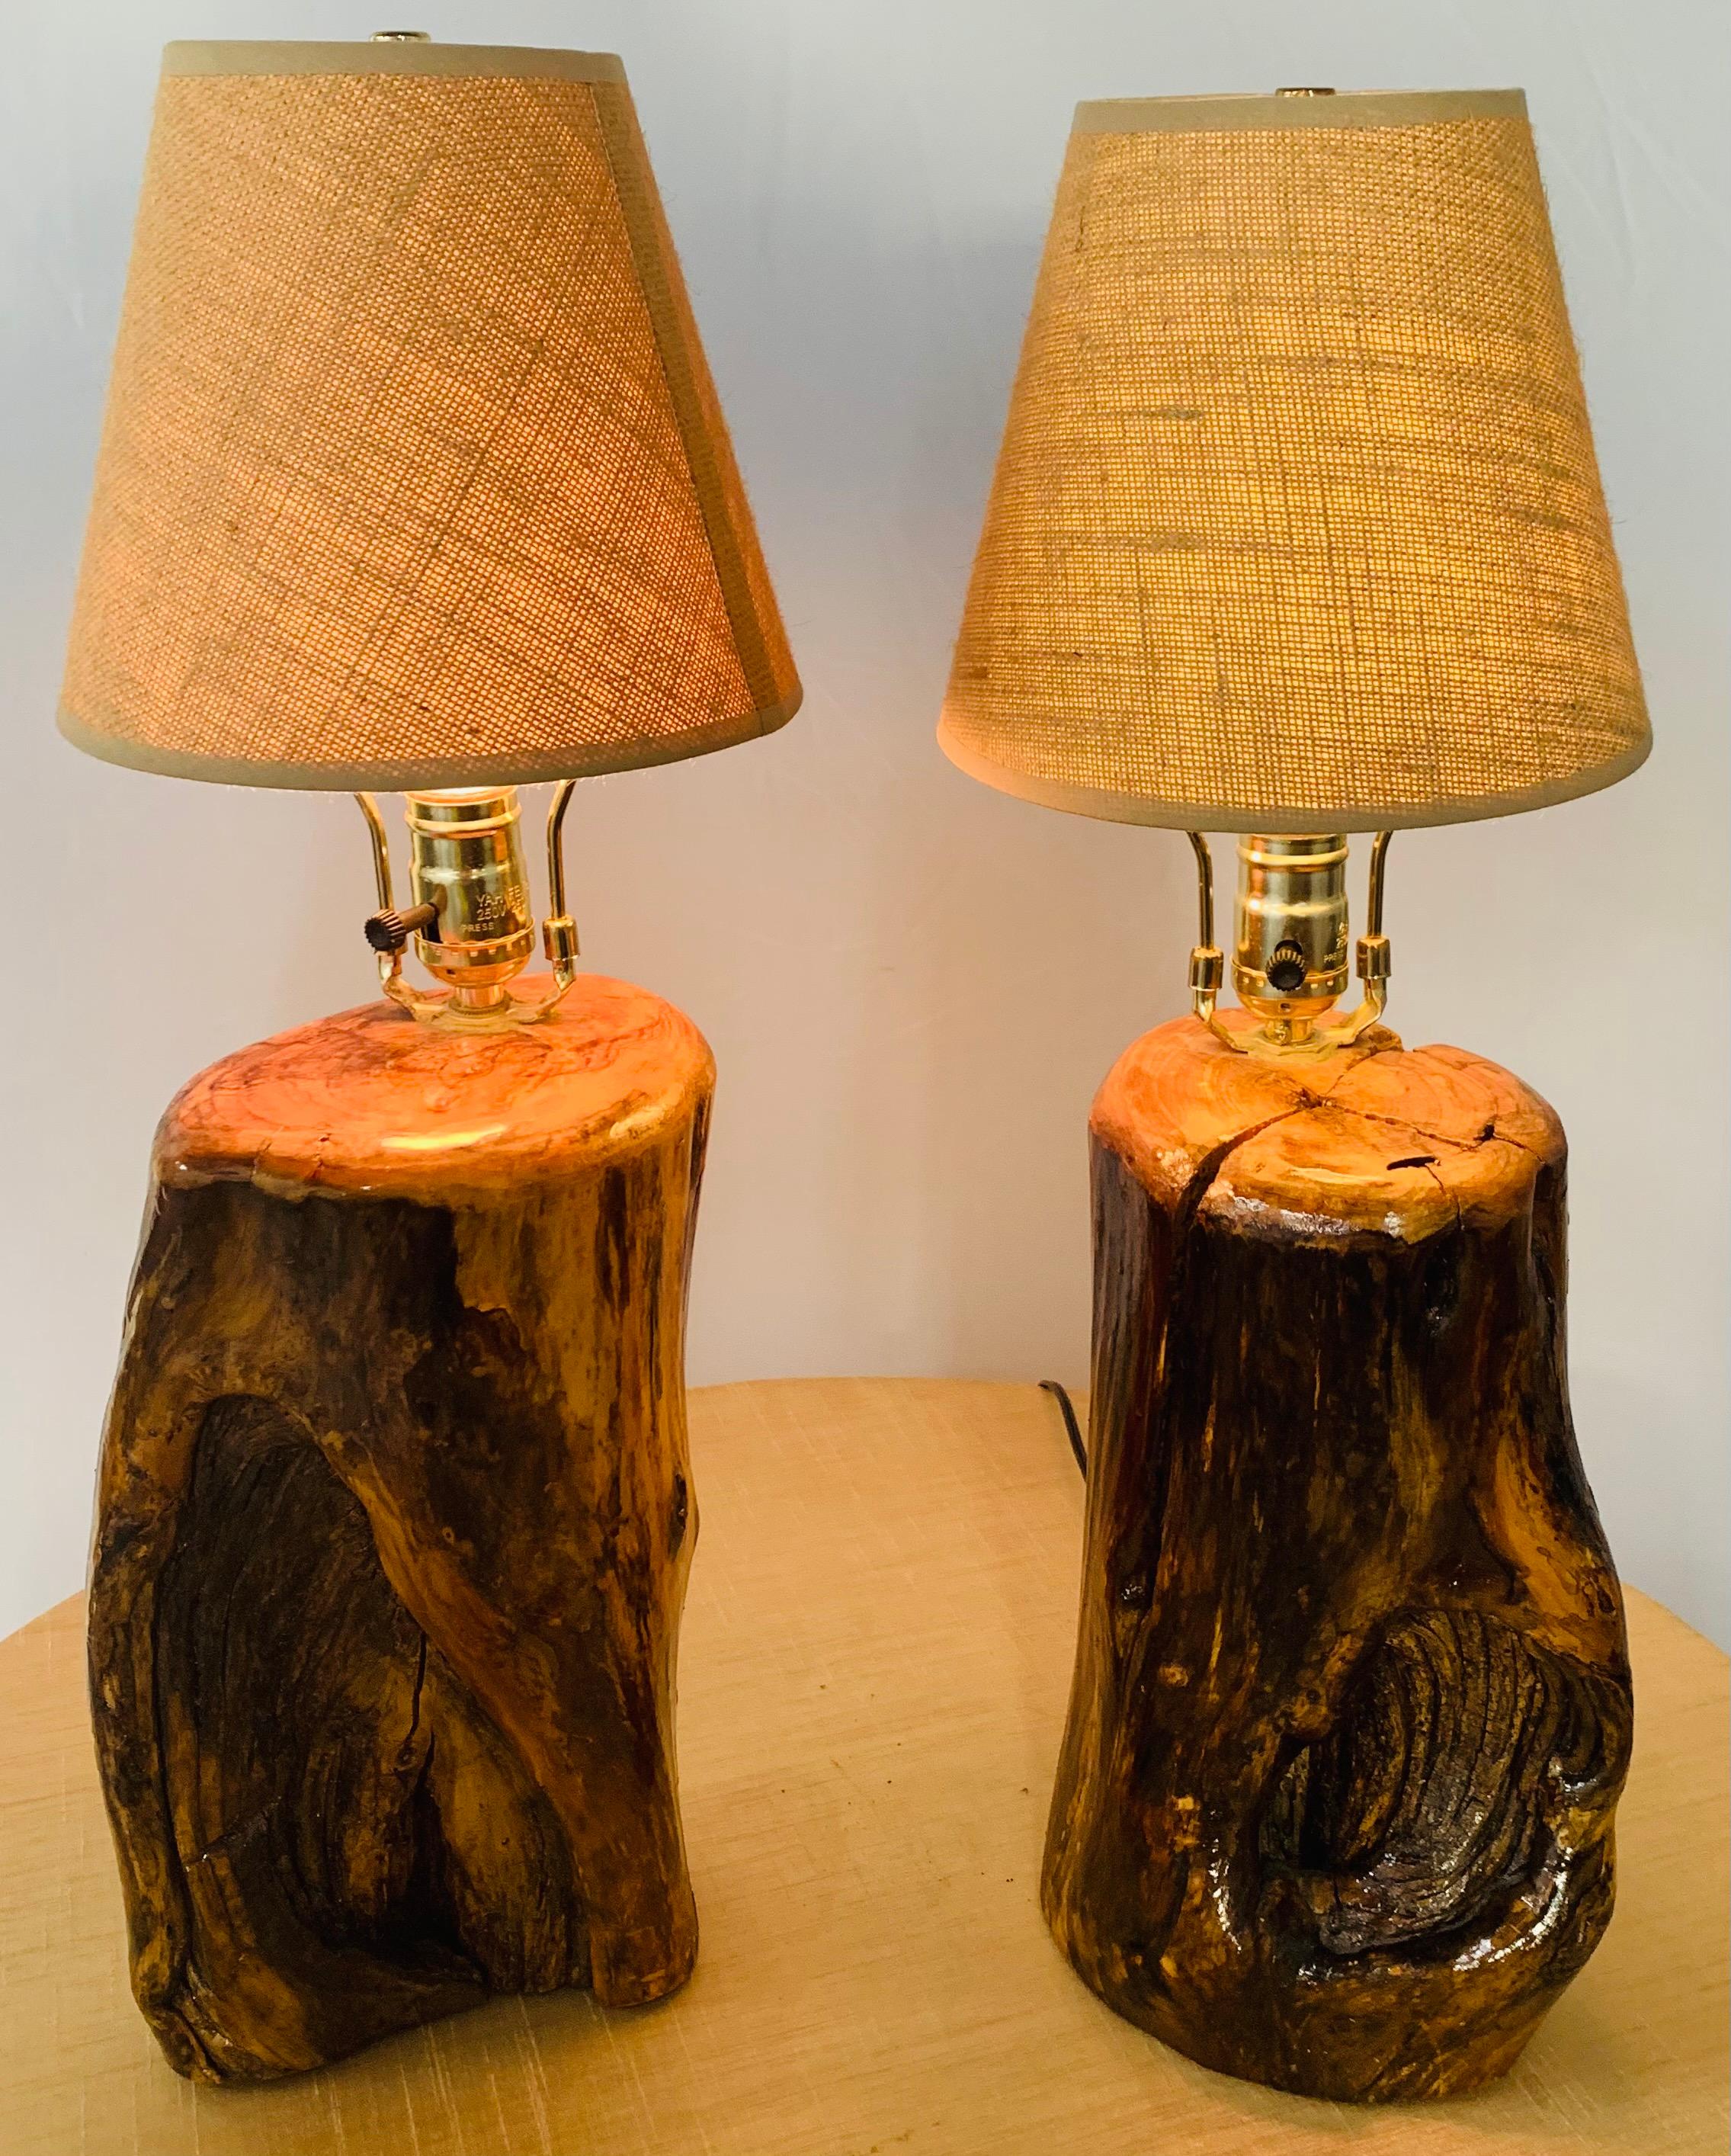 An exquisite handmade pair of organic modern design table lamps. Hand carved of high quality maple wood logs, the table lamps features original natural burl with a shiny lacquer finish. the rustic table lamps are highly decorative and would add